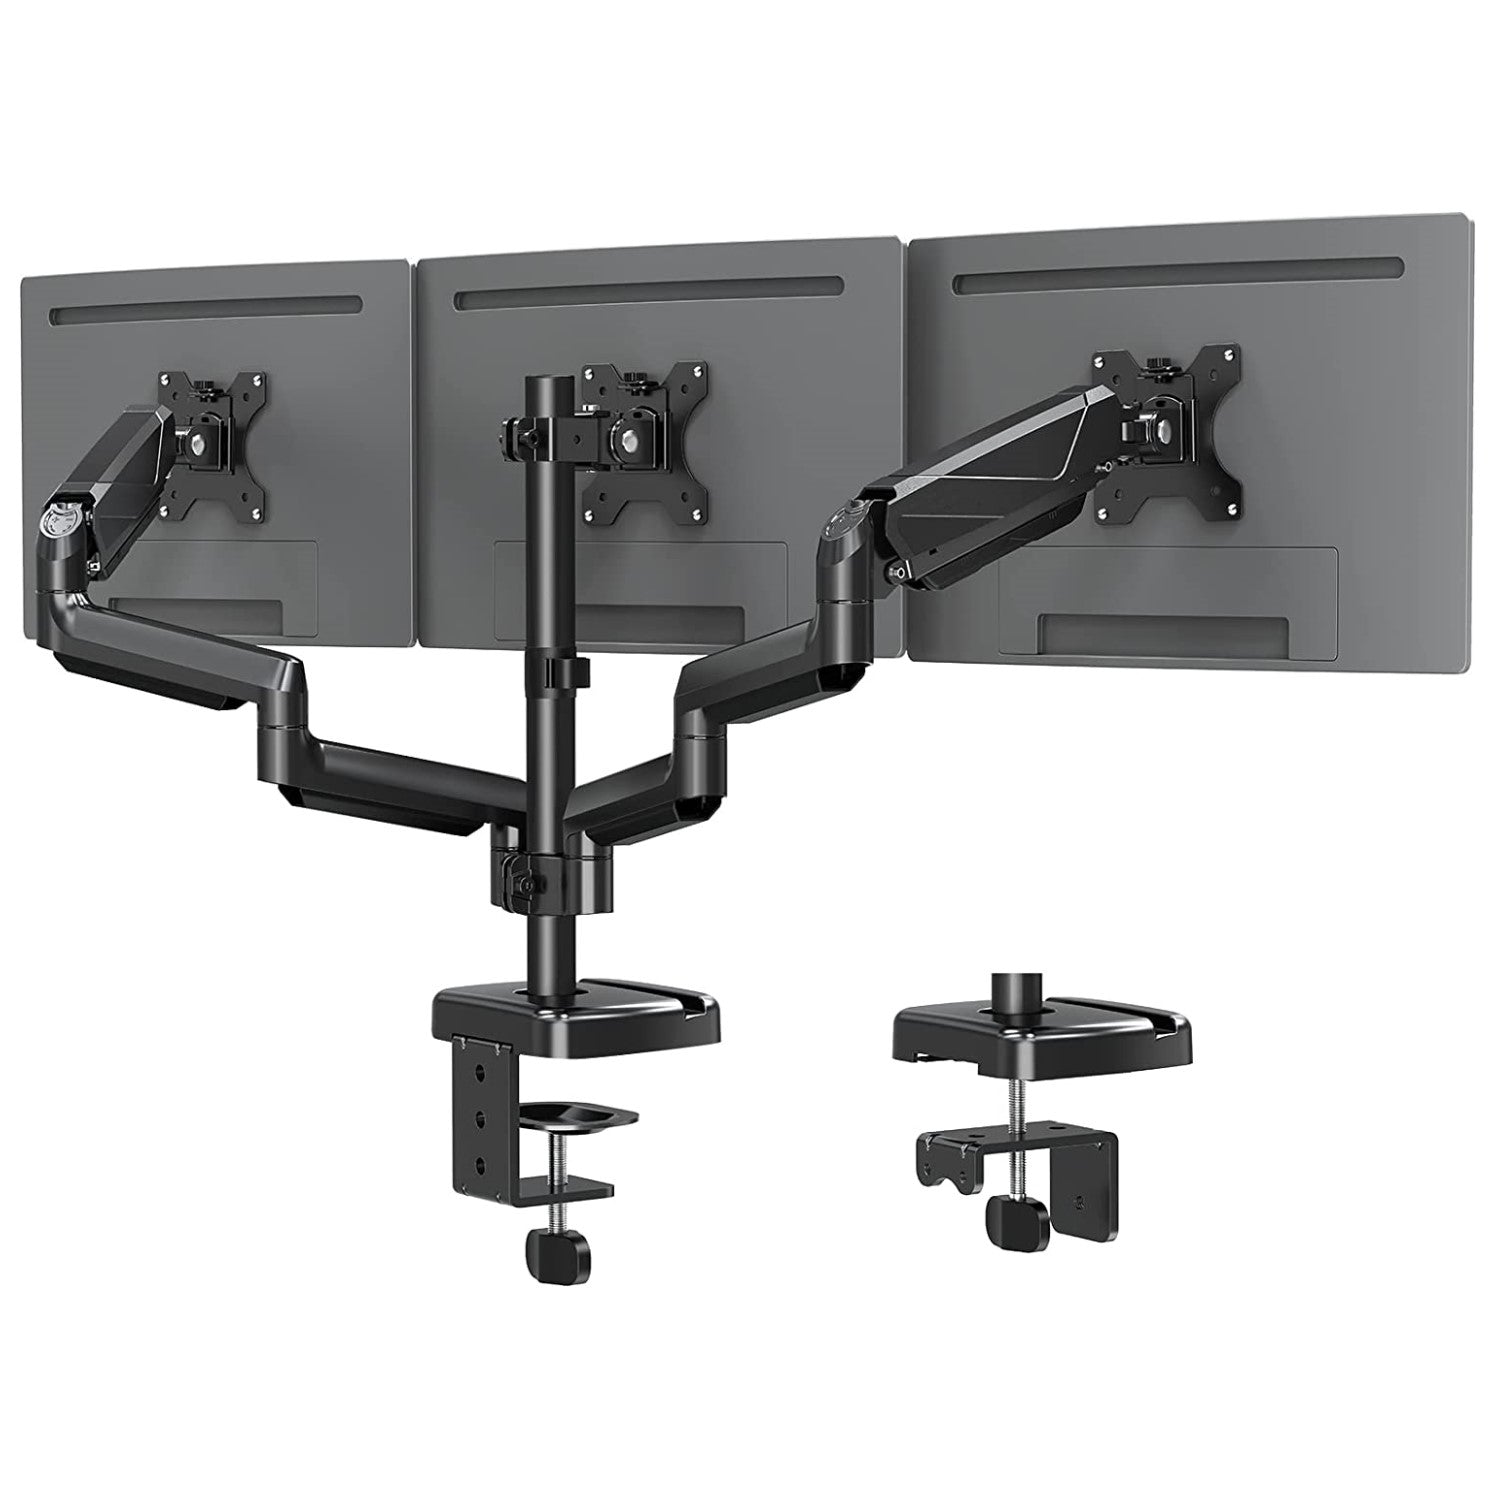 Triple Monitor Stand Gas Spring Arm 27 inch Monitors